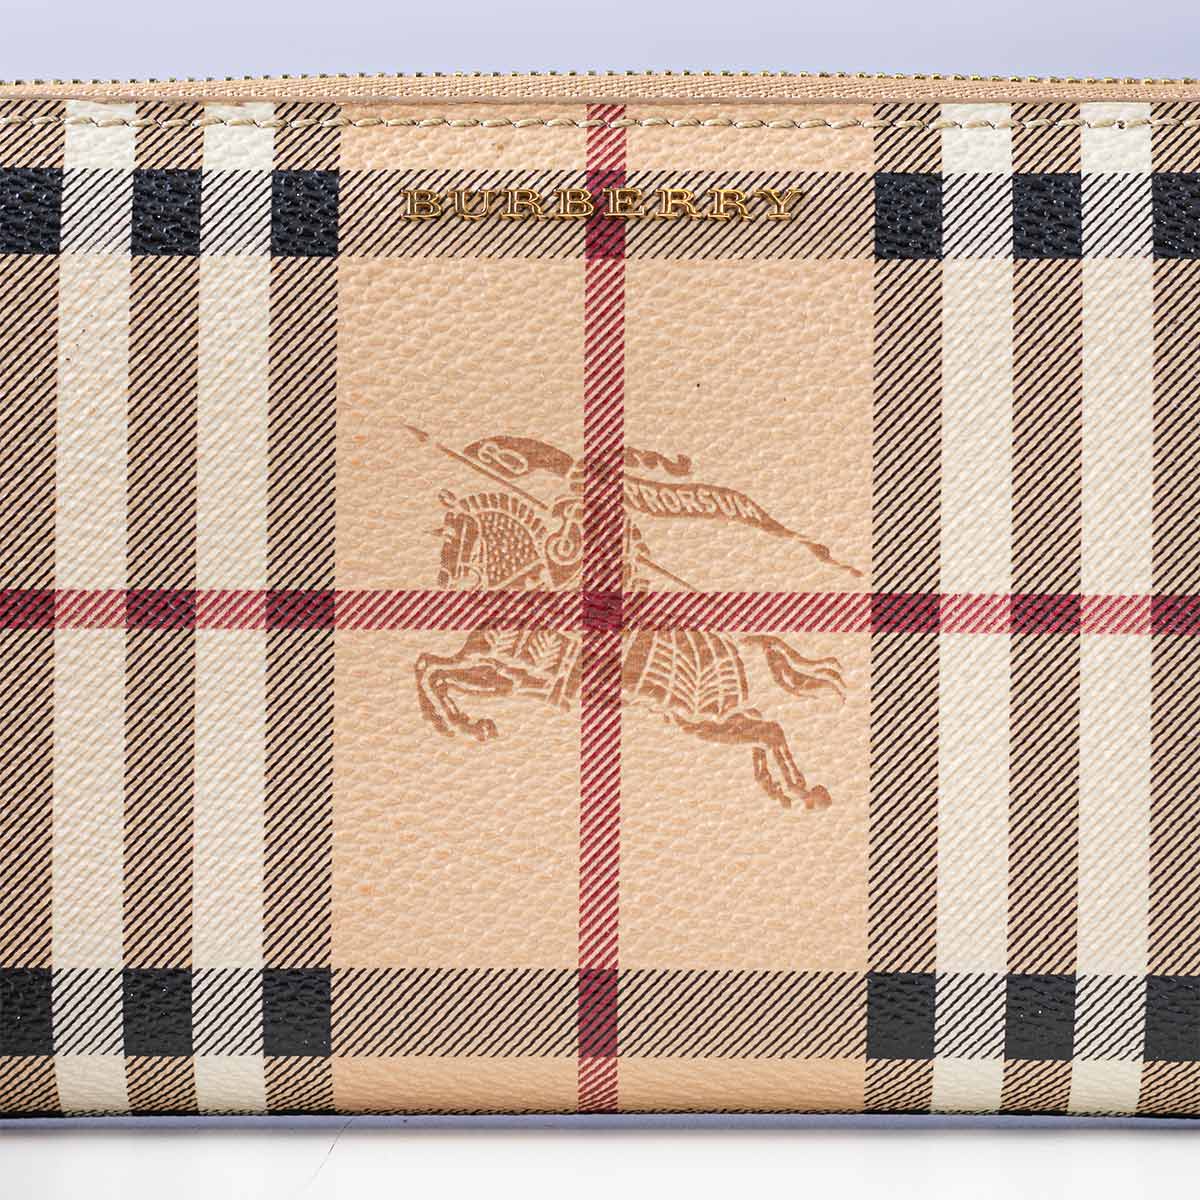 Burberry Continental Wallet